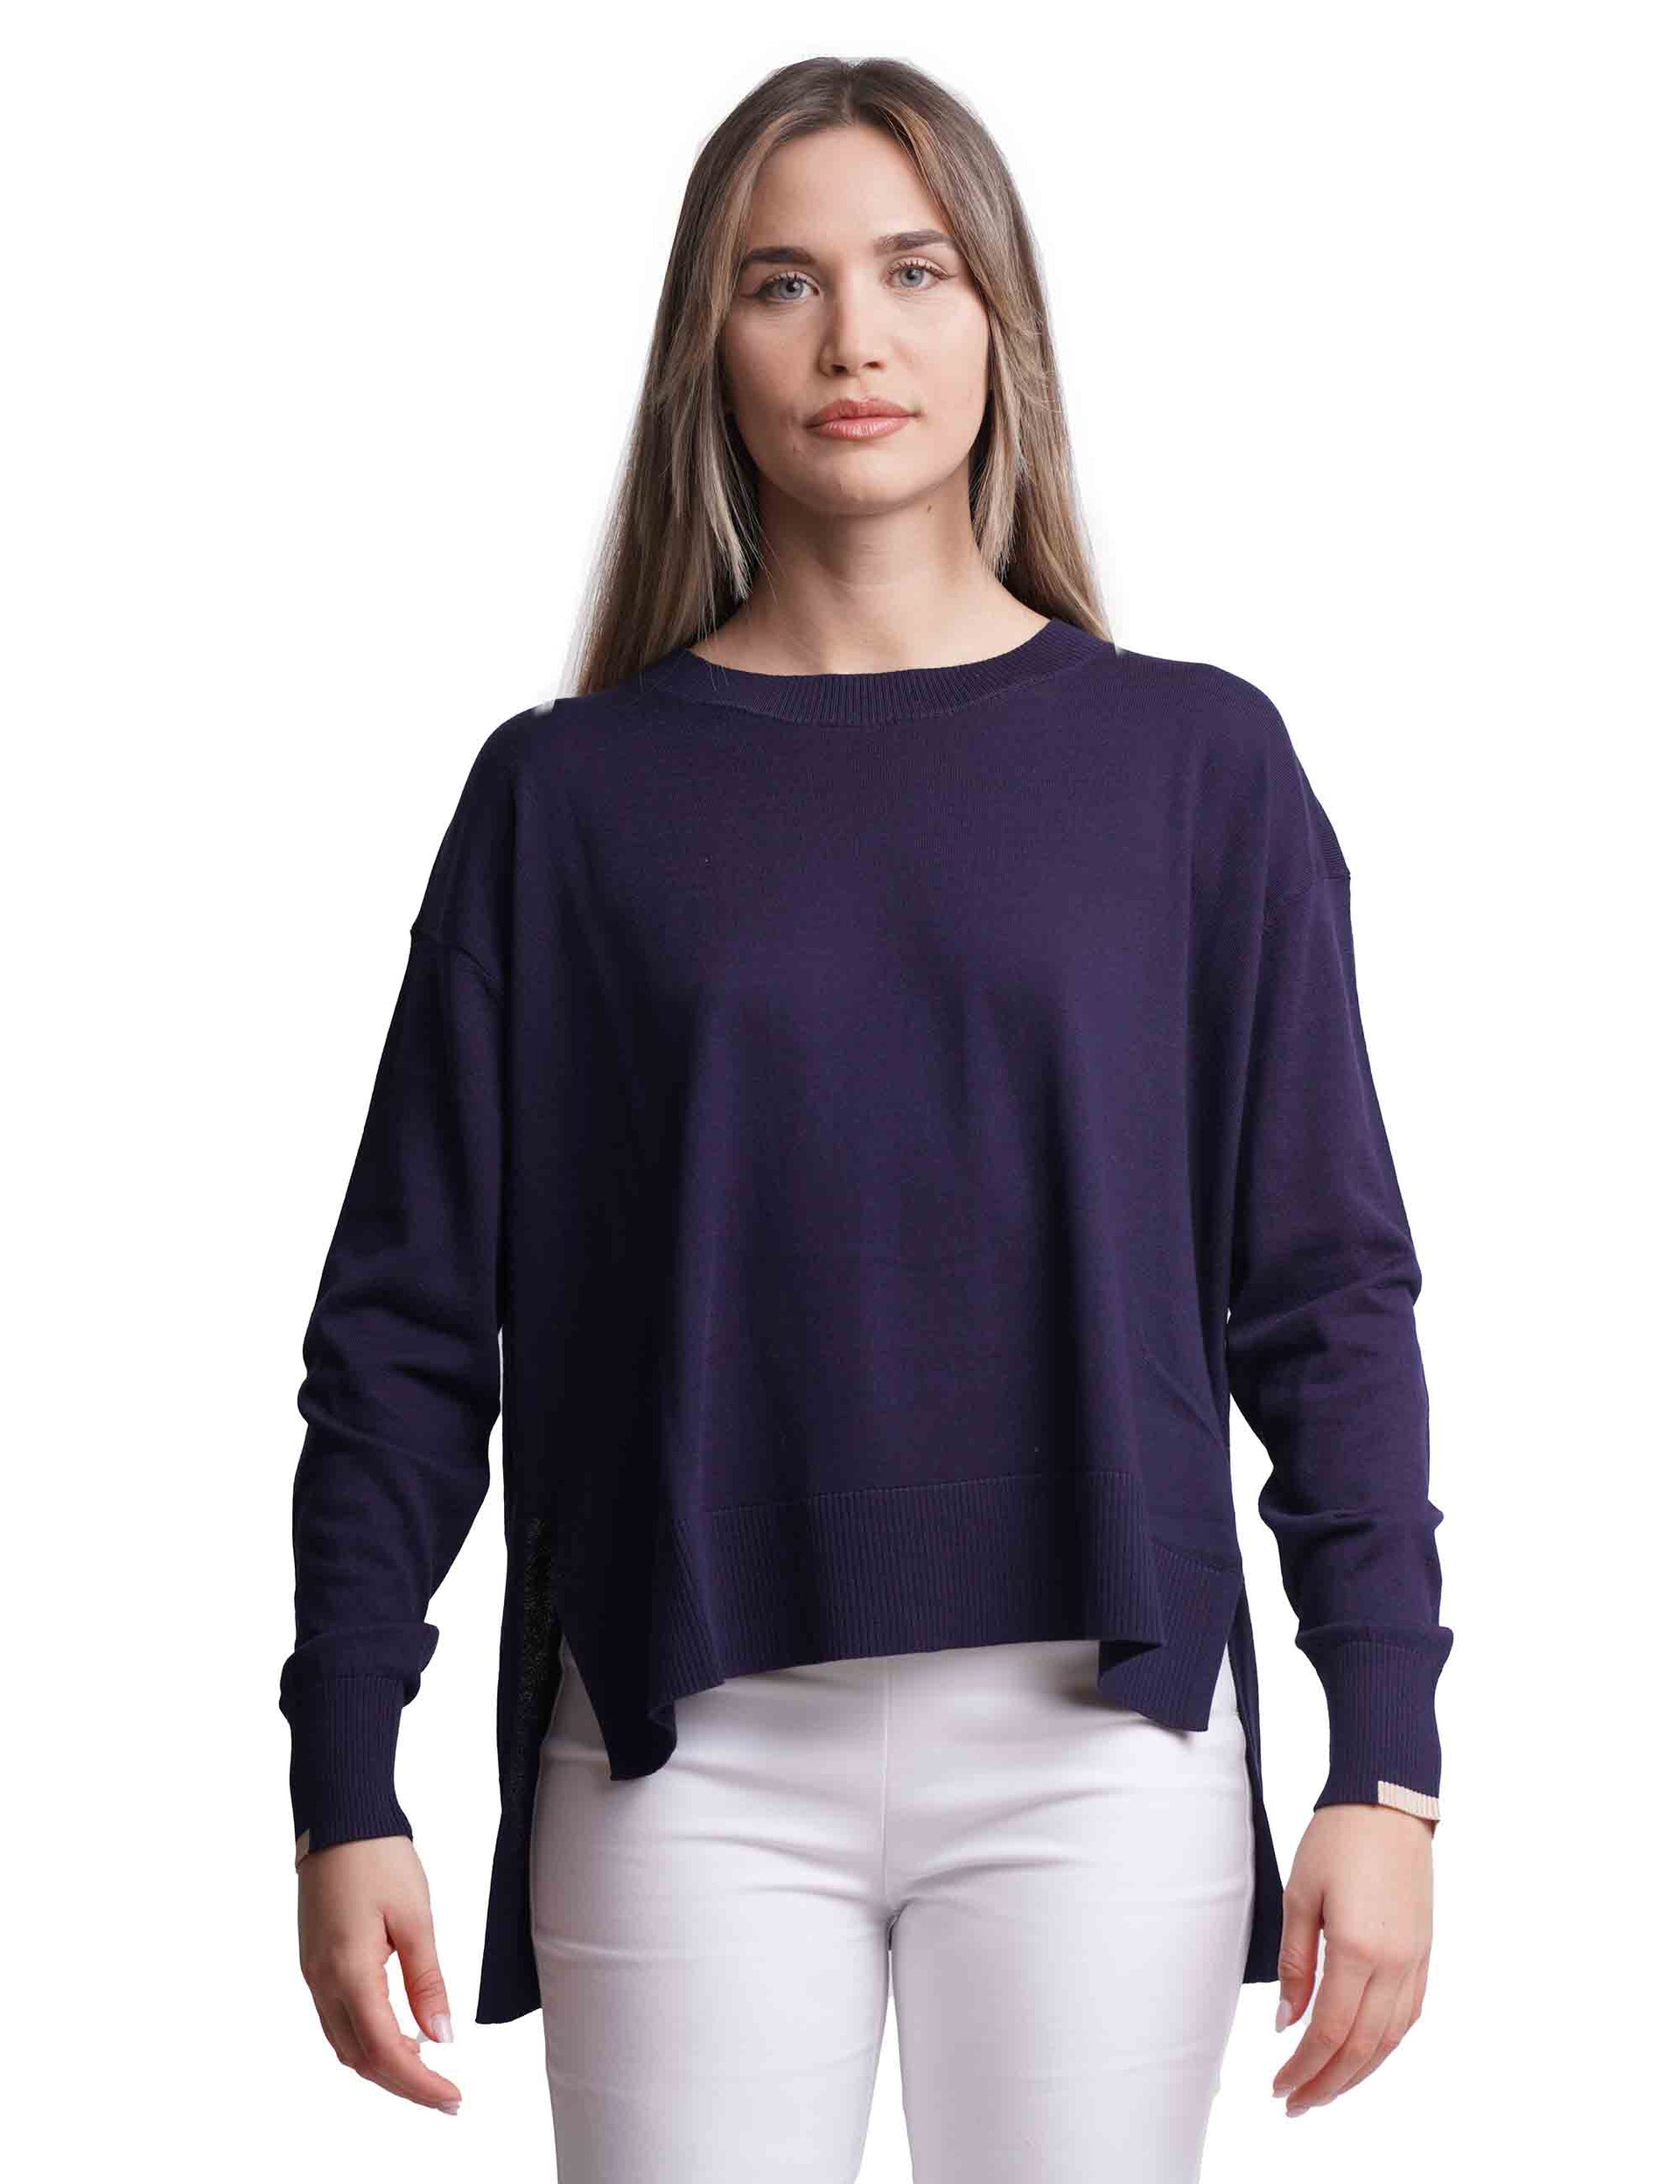 Smooth women's sweaters in blue cotton with long sleeves